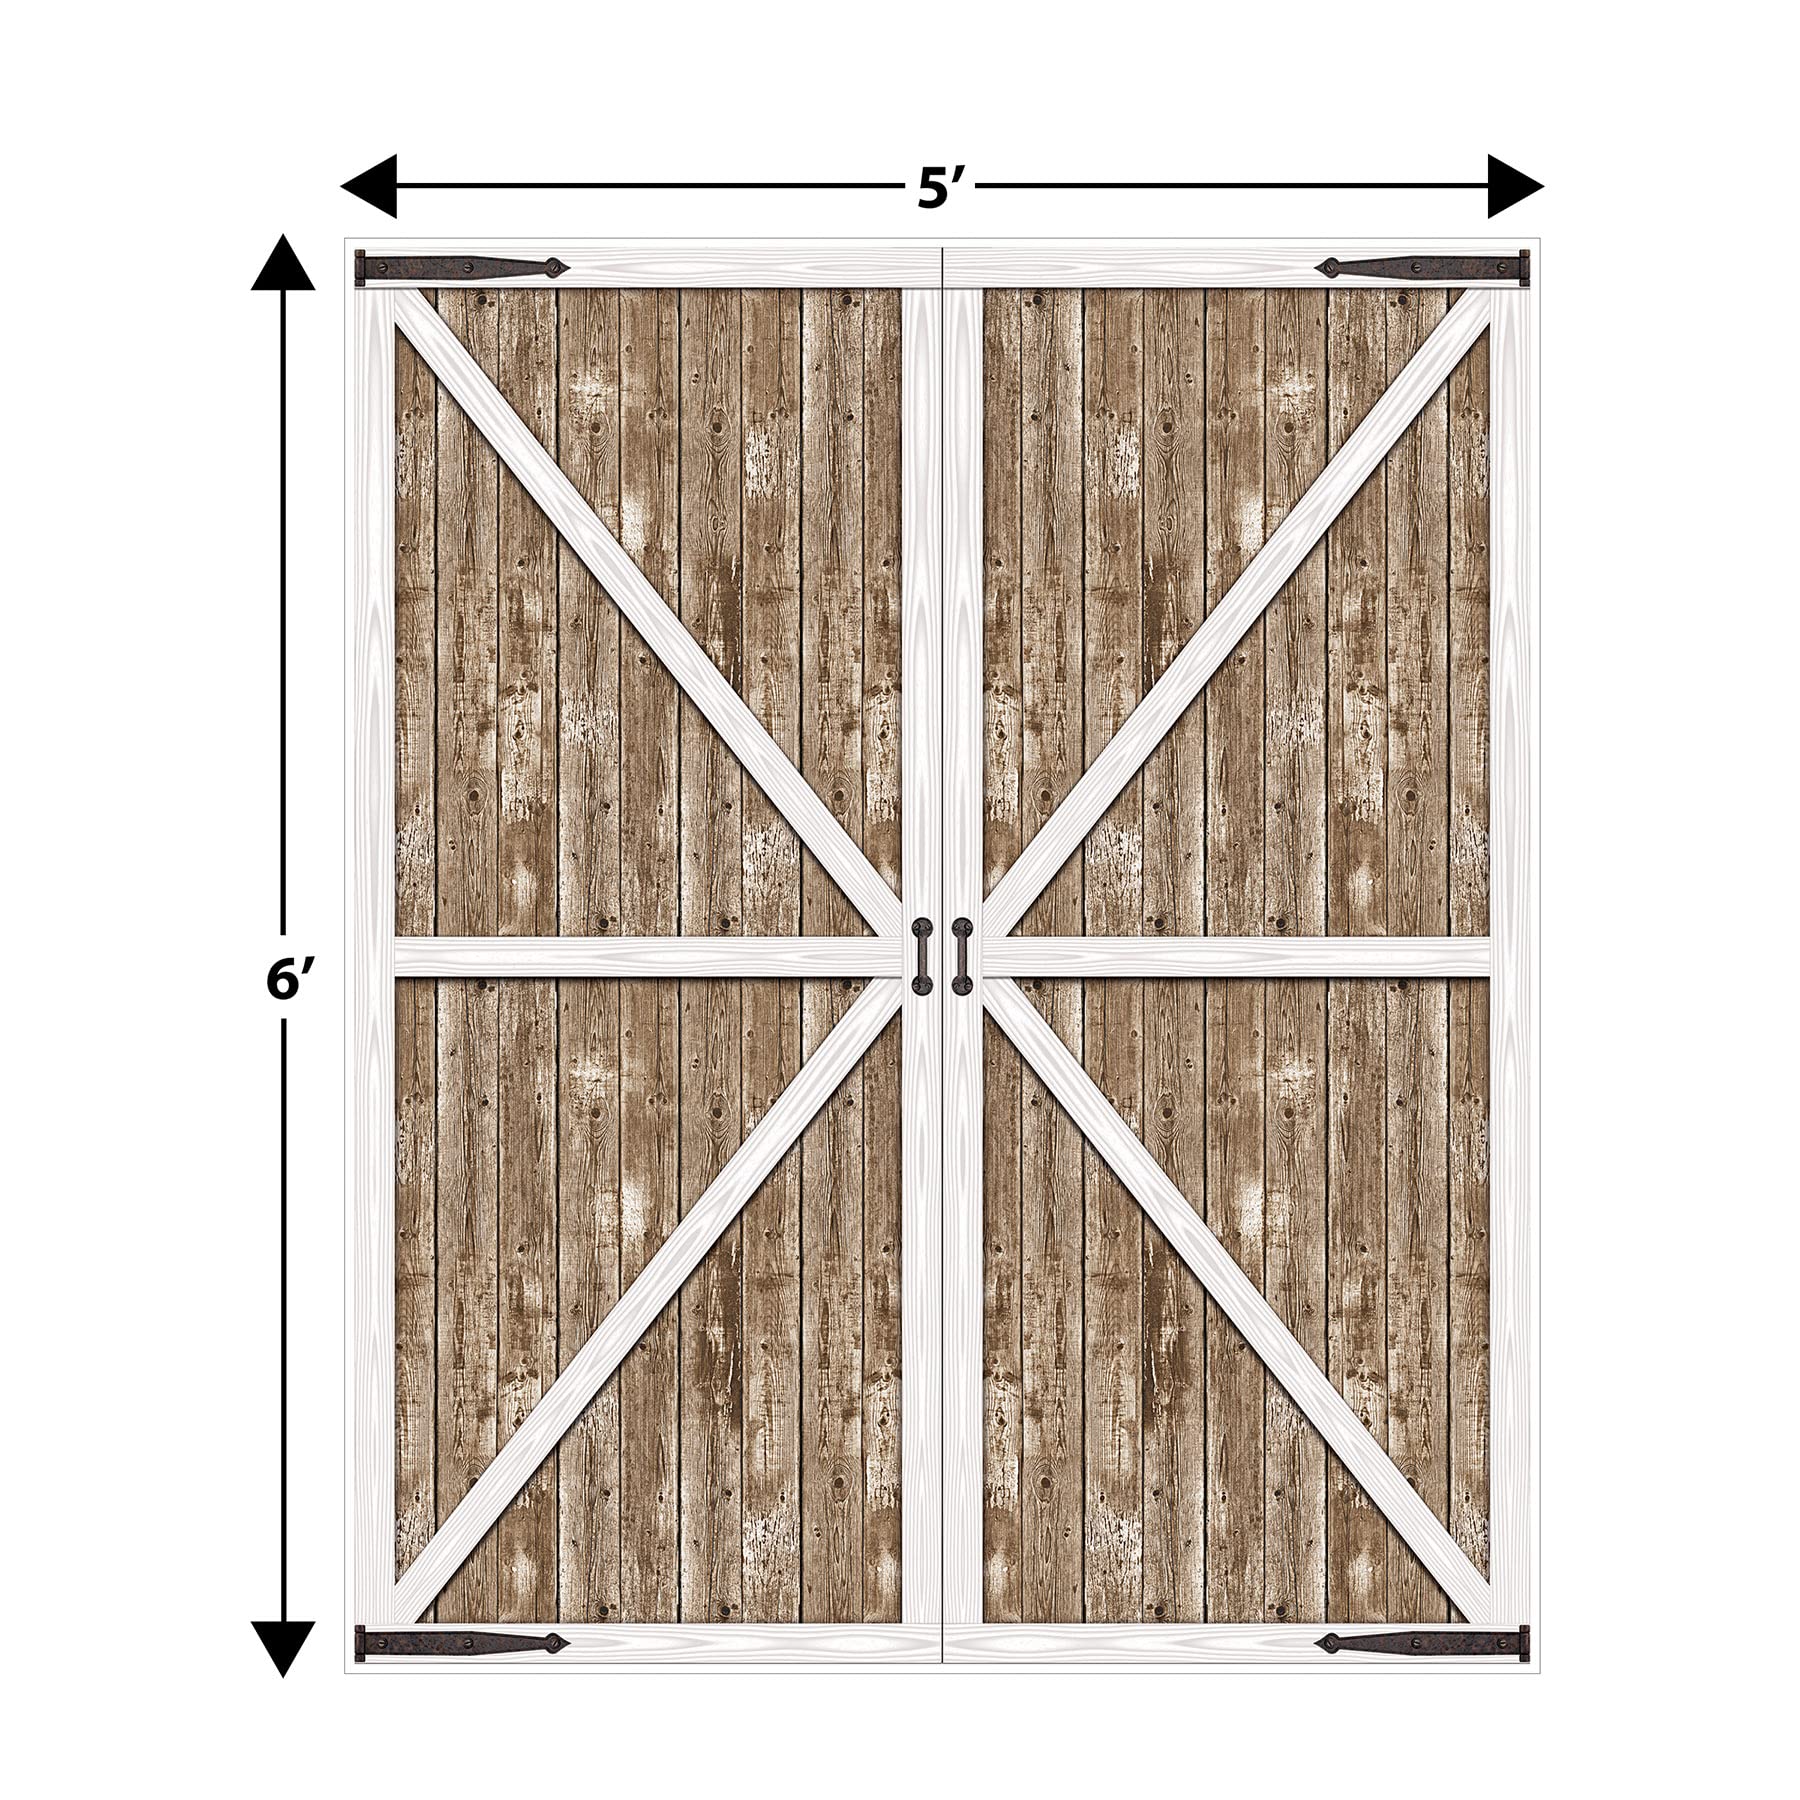 Beistle 6' x 5' Rustic Western Barn Door Photography Background Farm Theme Photo Shoot Backdrop For Birthday, Baby Showers, Wedding Day Décor, Brown/White/Black